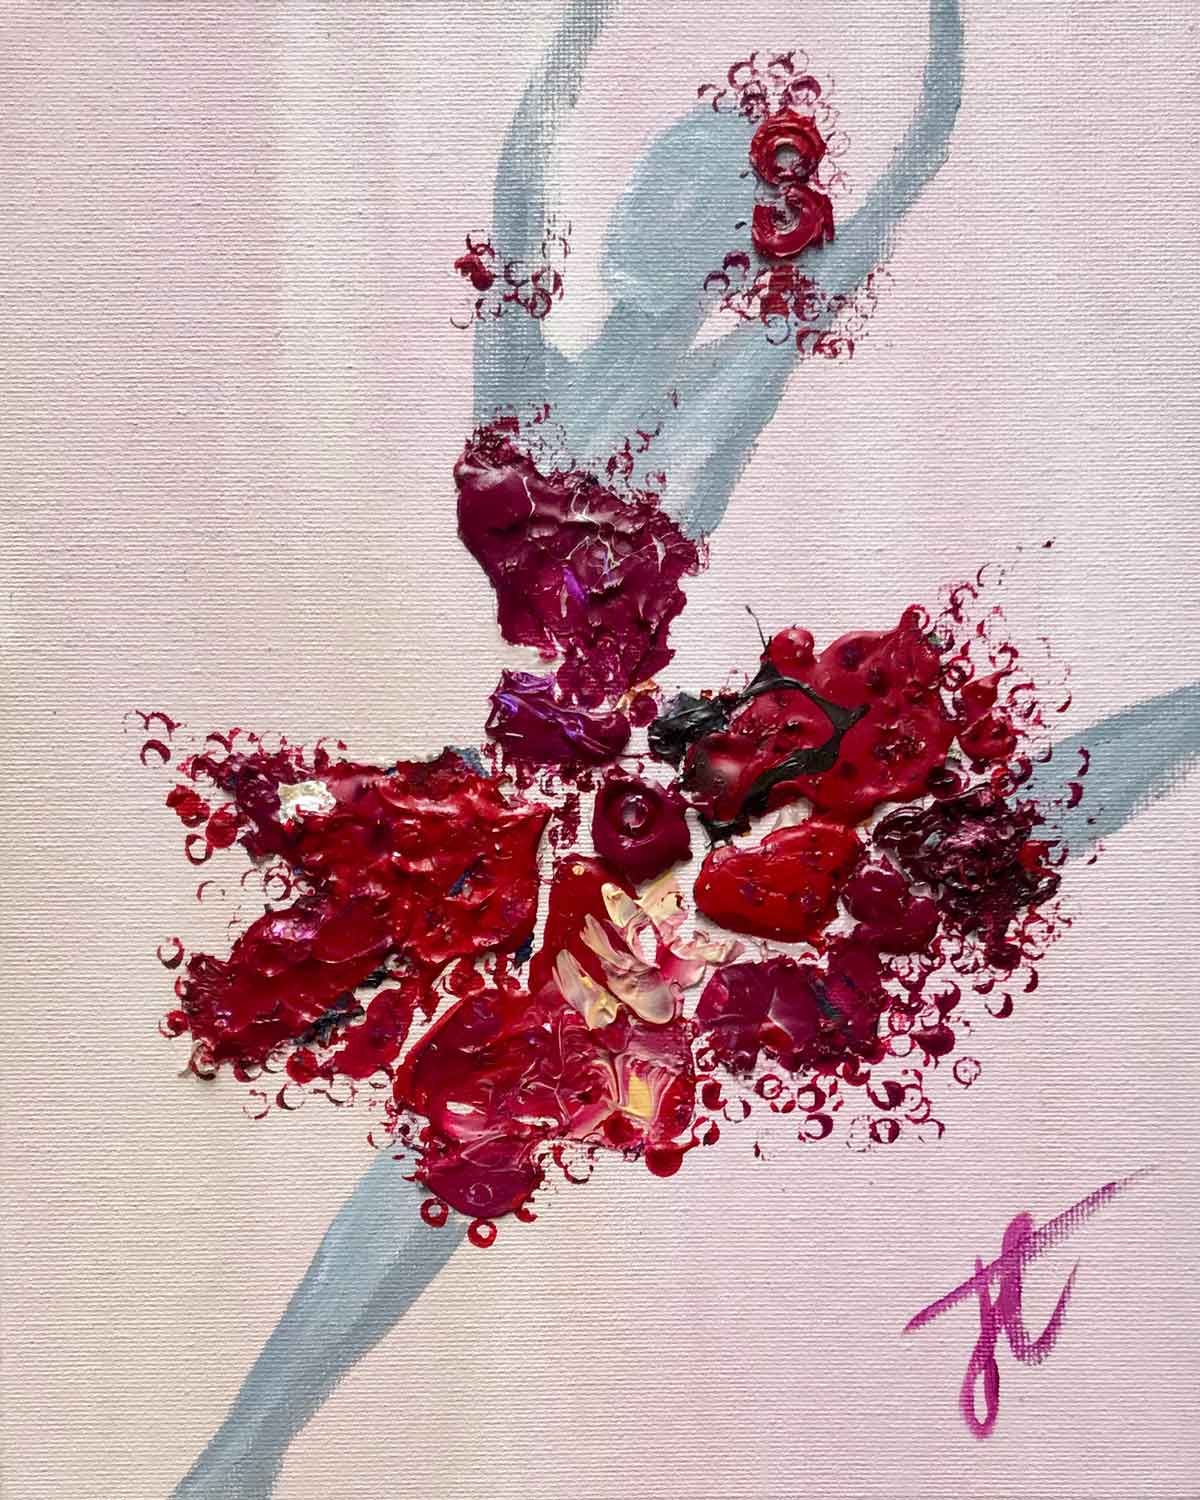 Painting cropped to edges: a ballerina captured mid-jump with her arms in fifth position. Her headdress and tutu are created from different shaped pieces of red paint which gives these elements dimensionality. The background is light pink.